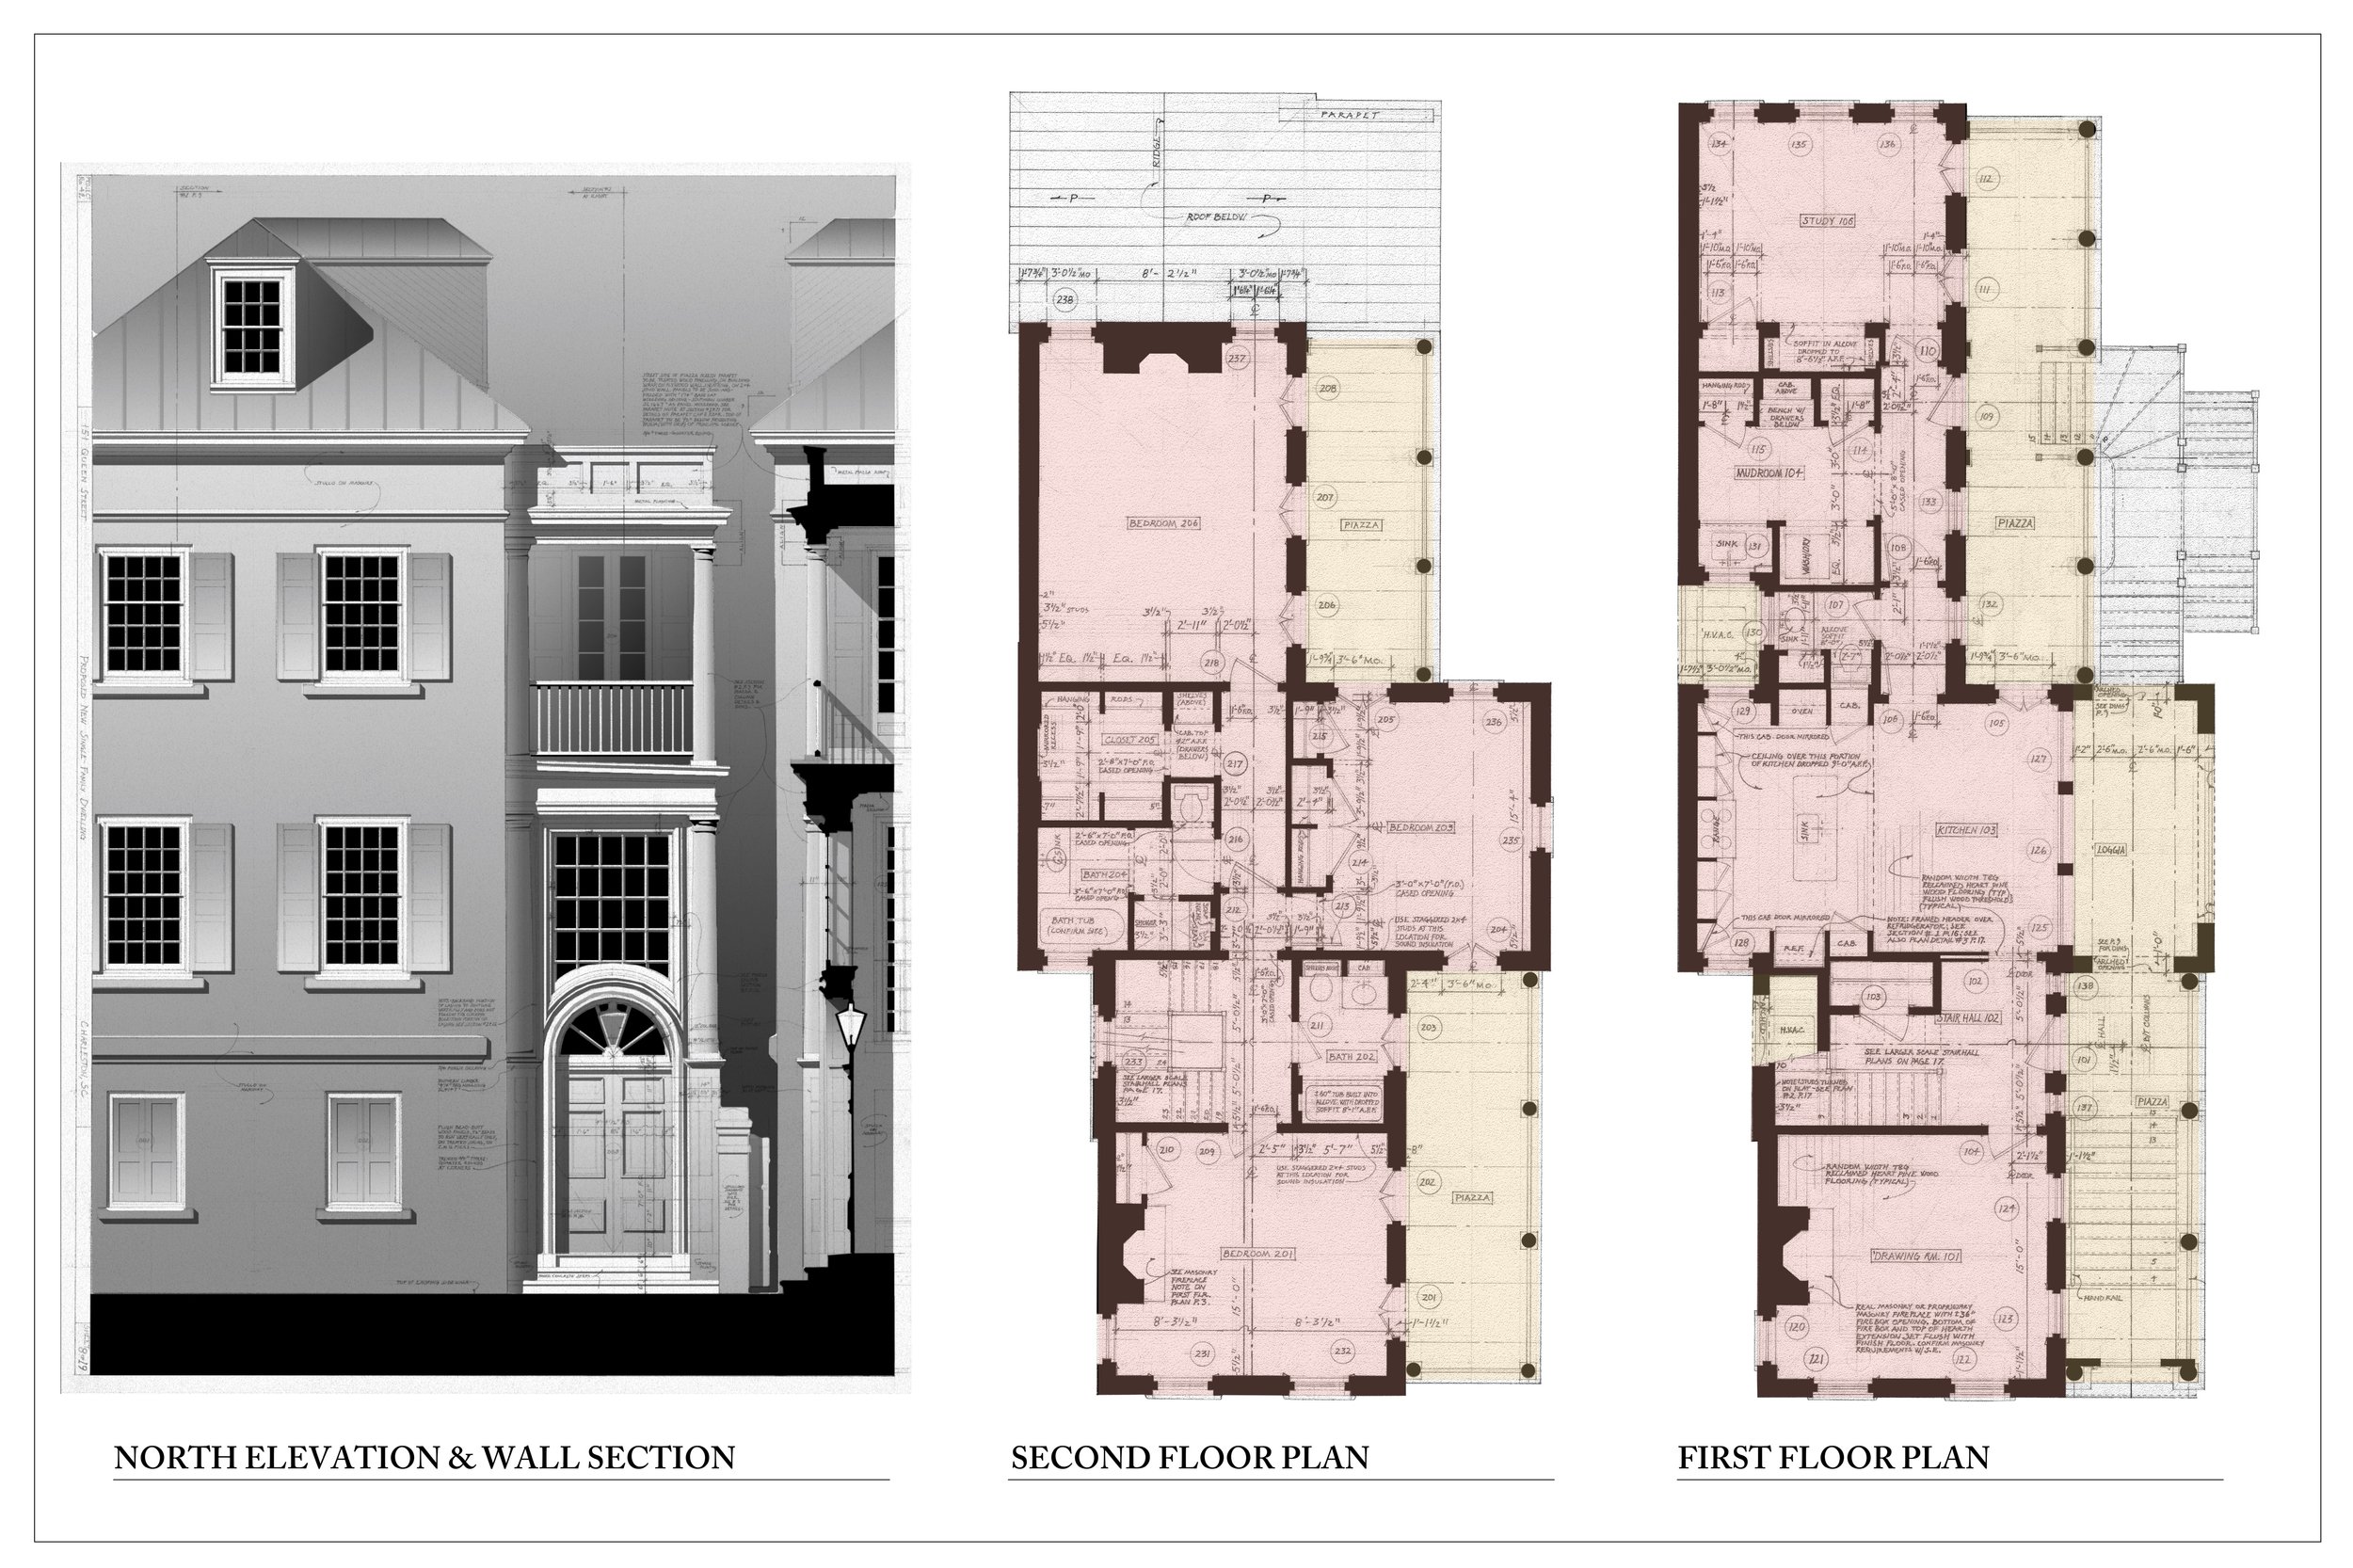 04_Queen St_Plans and N elevation_small.jpg